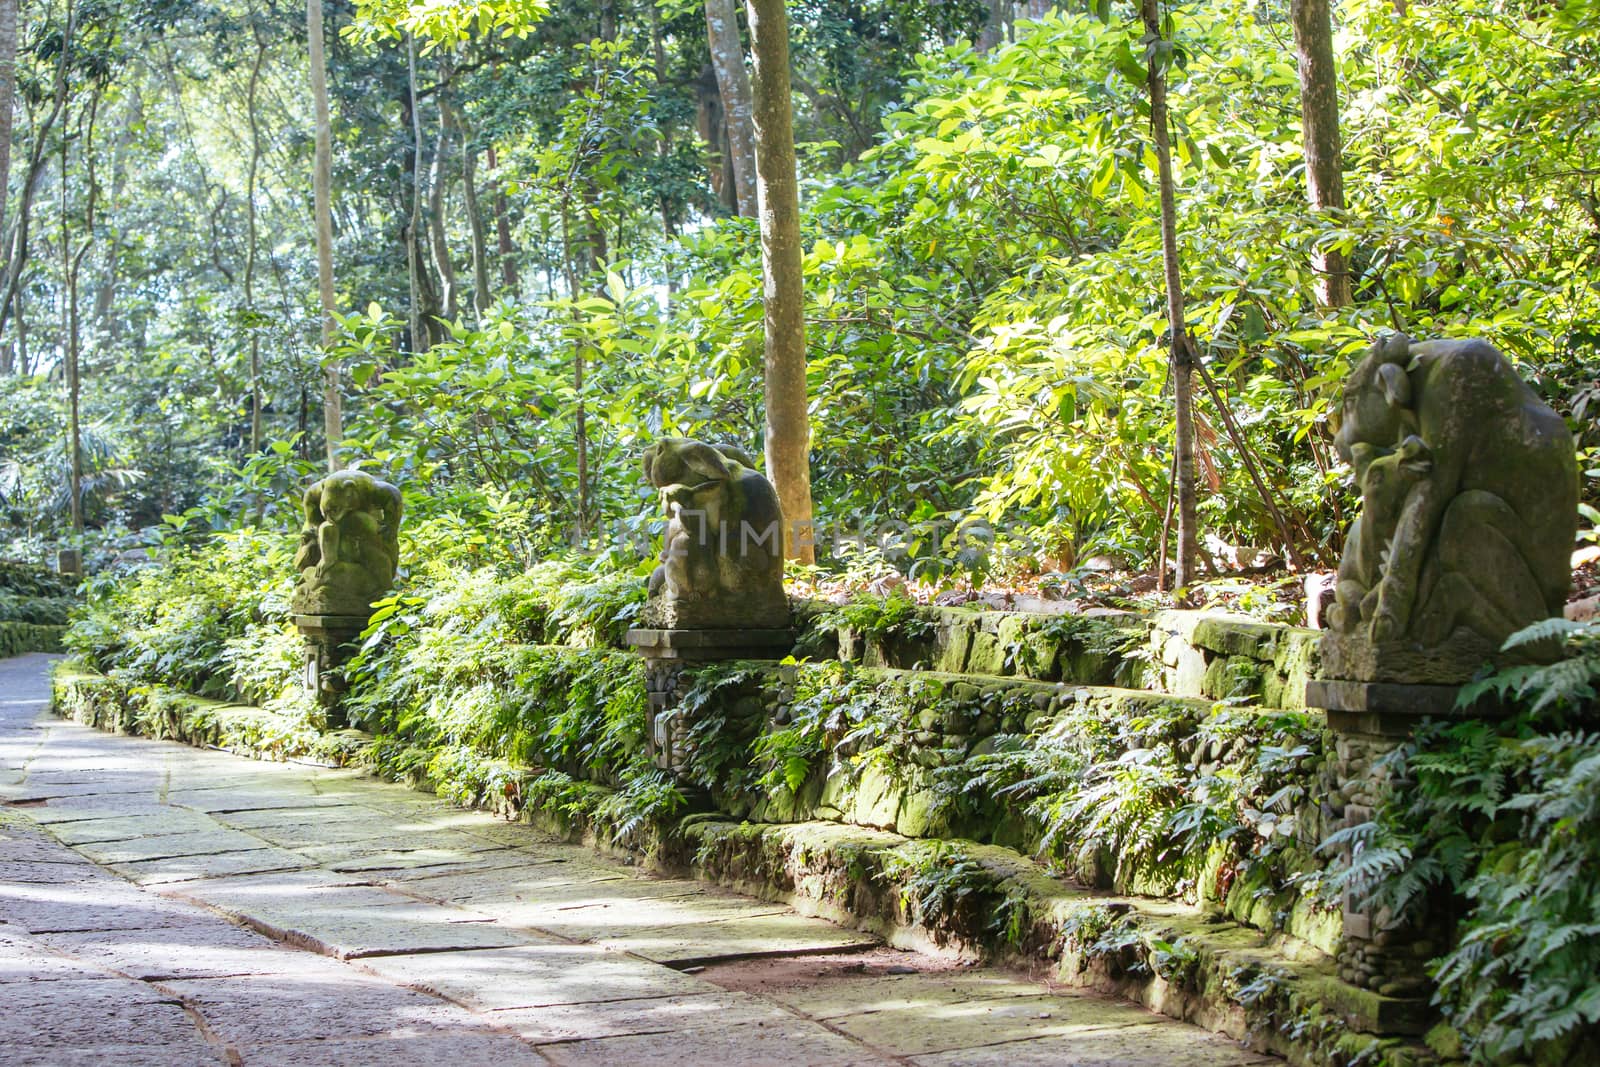 The grounds of Monkey Forest Sanctuary in Ubud, Bali,Indonesia